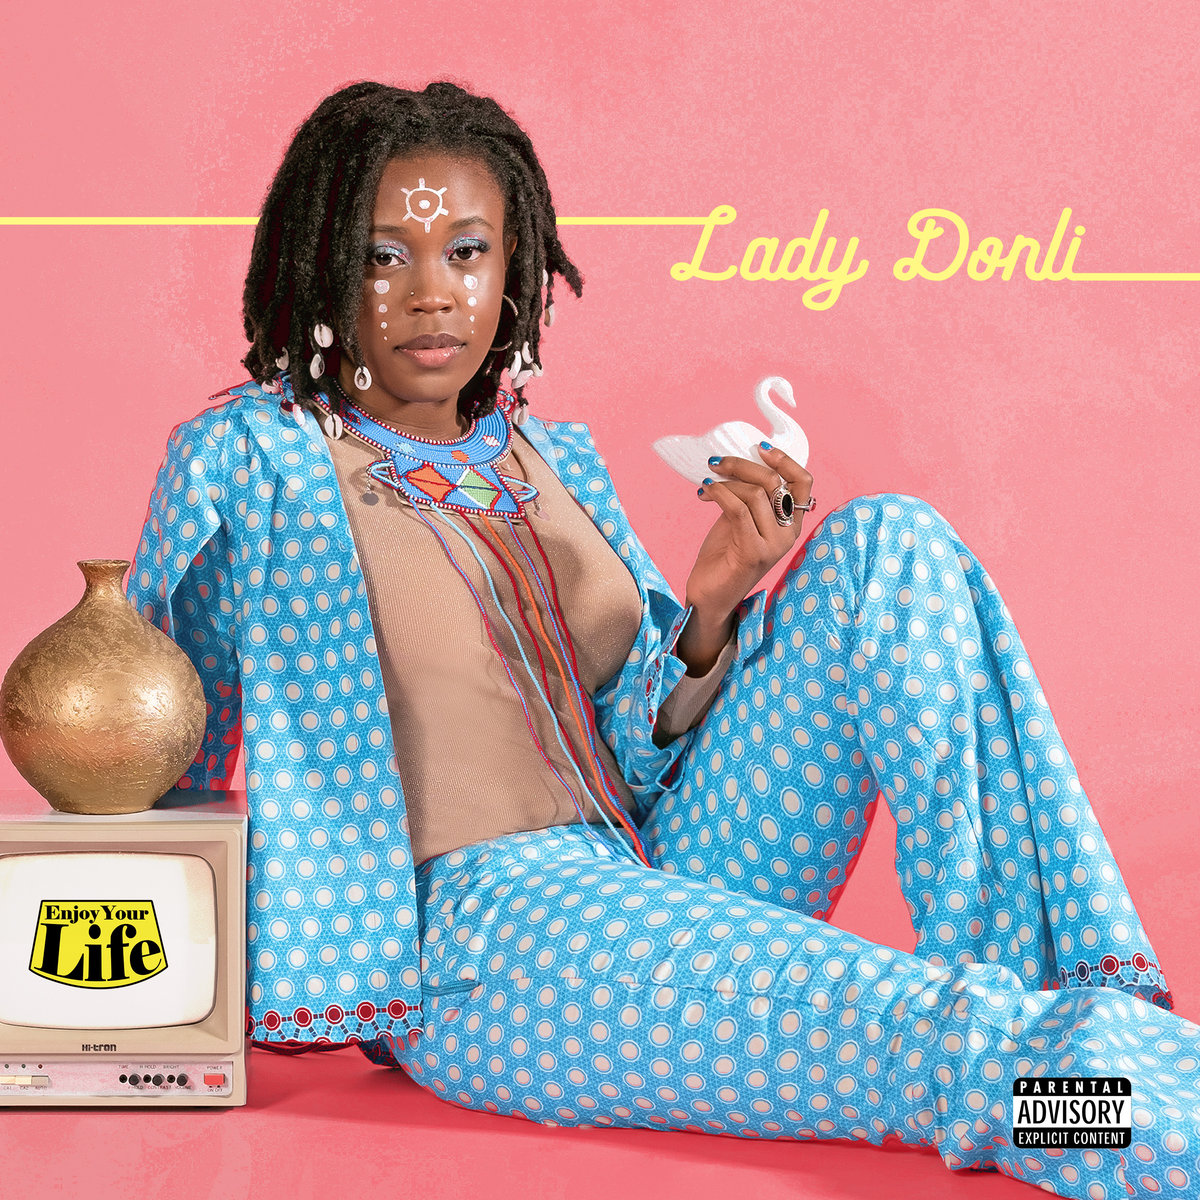 Lady Donli’s debut album, 'Enjoy Your Life' was released in which month?